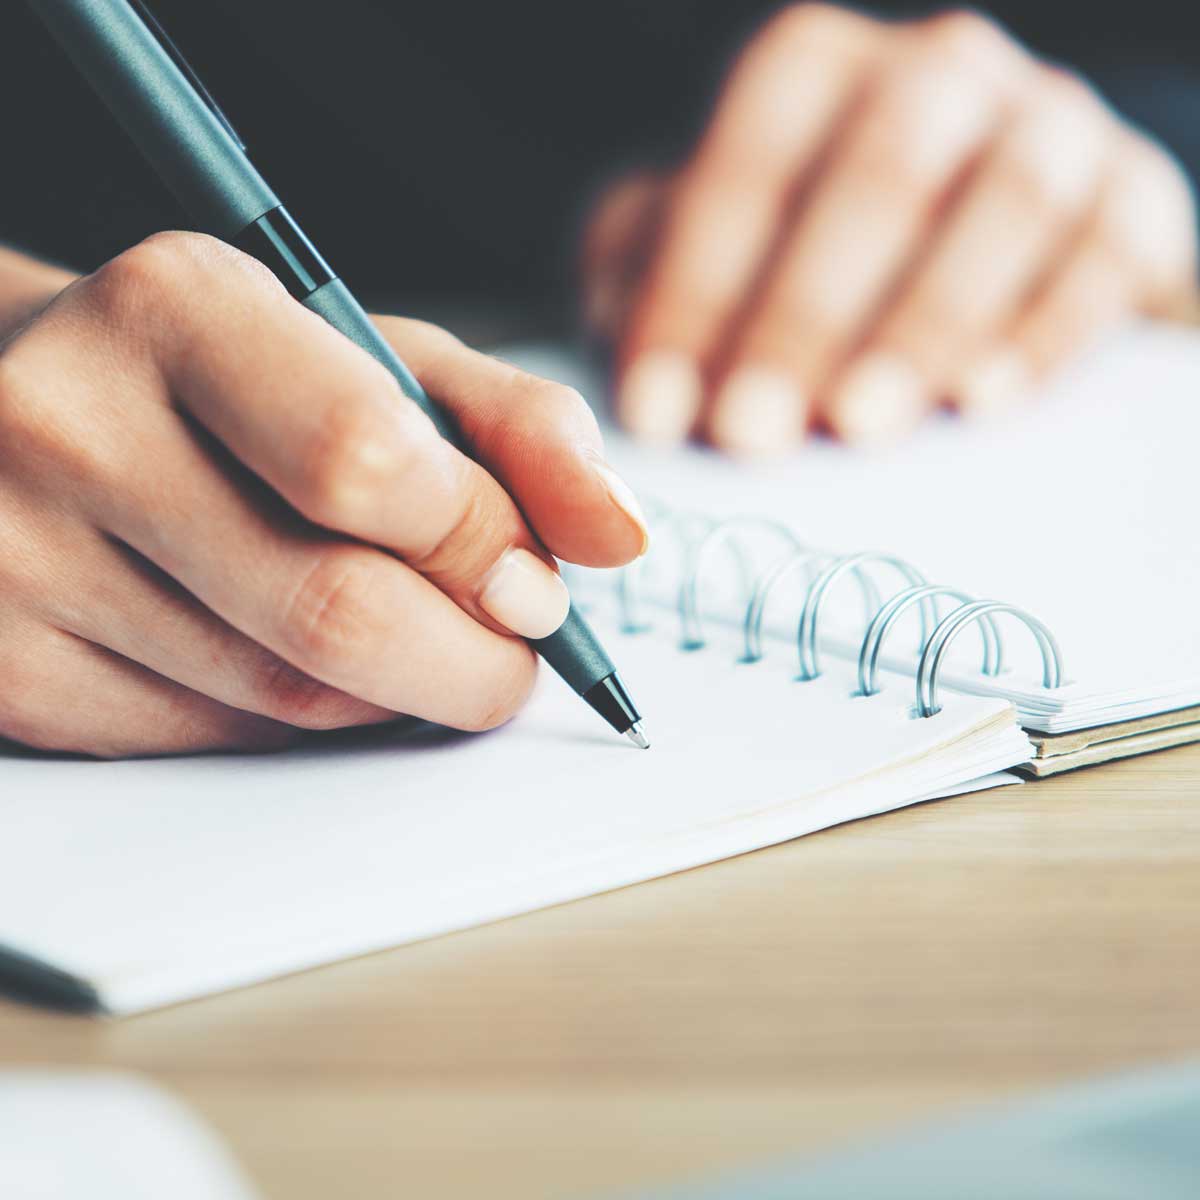 Woman writing in notepad; image focused on hand holding the pen on top of the spiral notepad